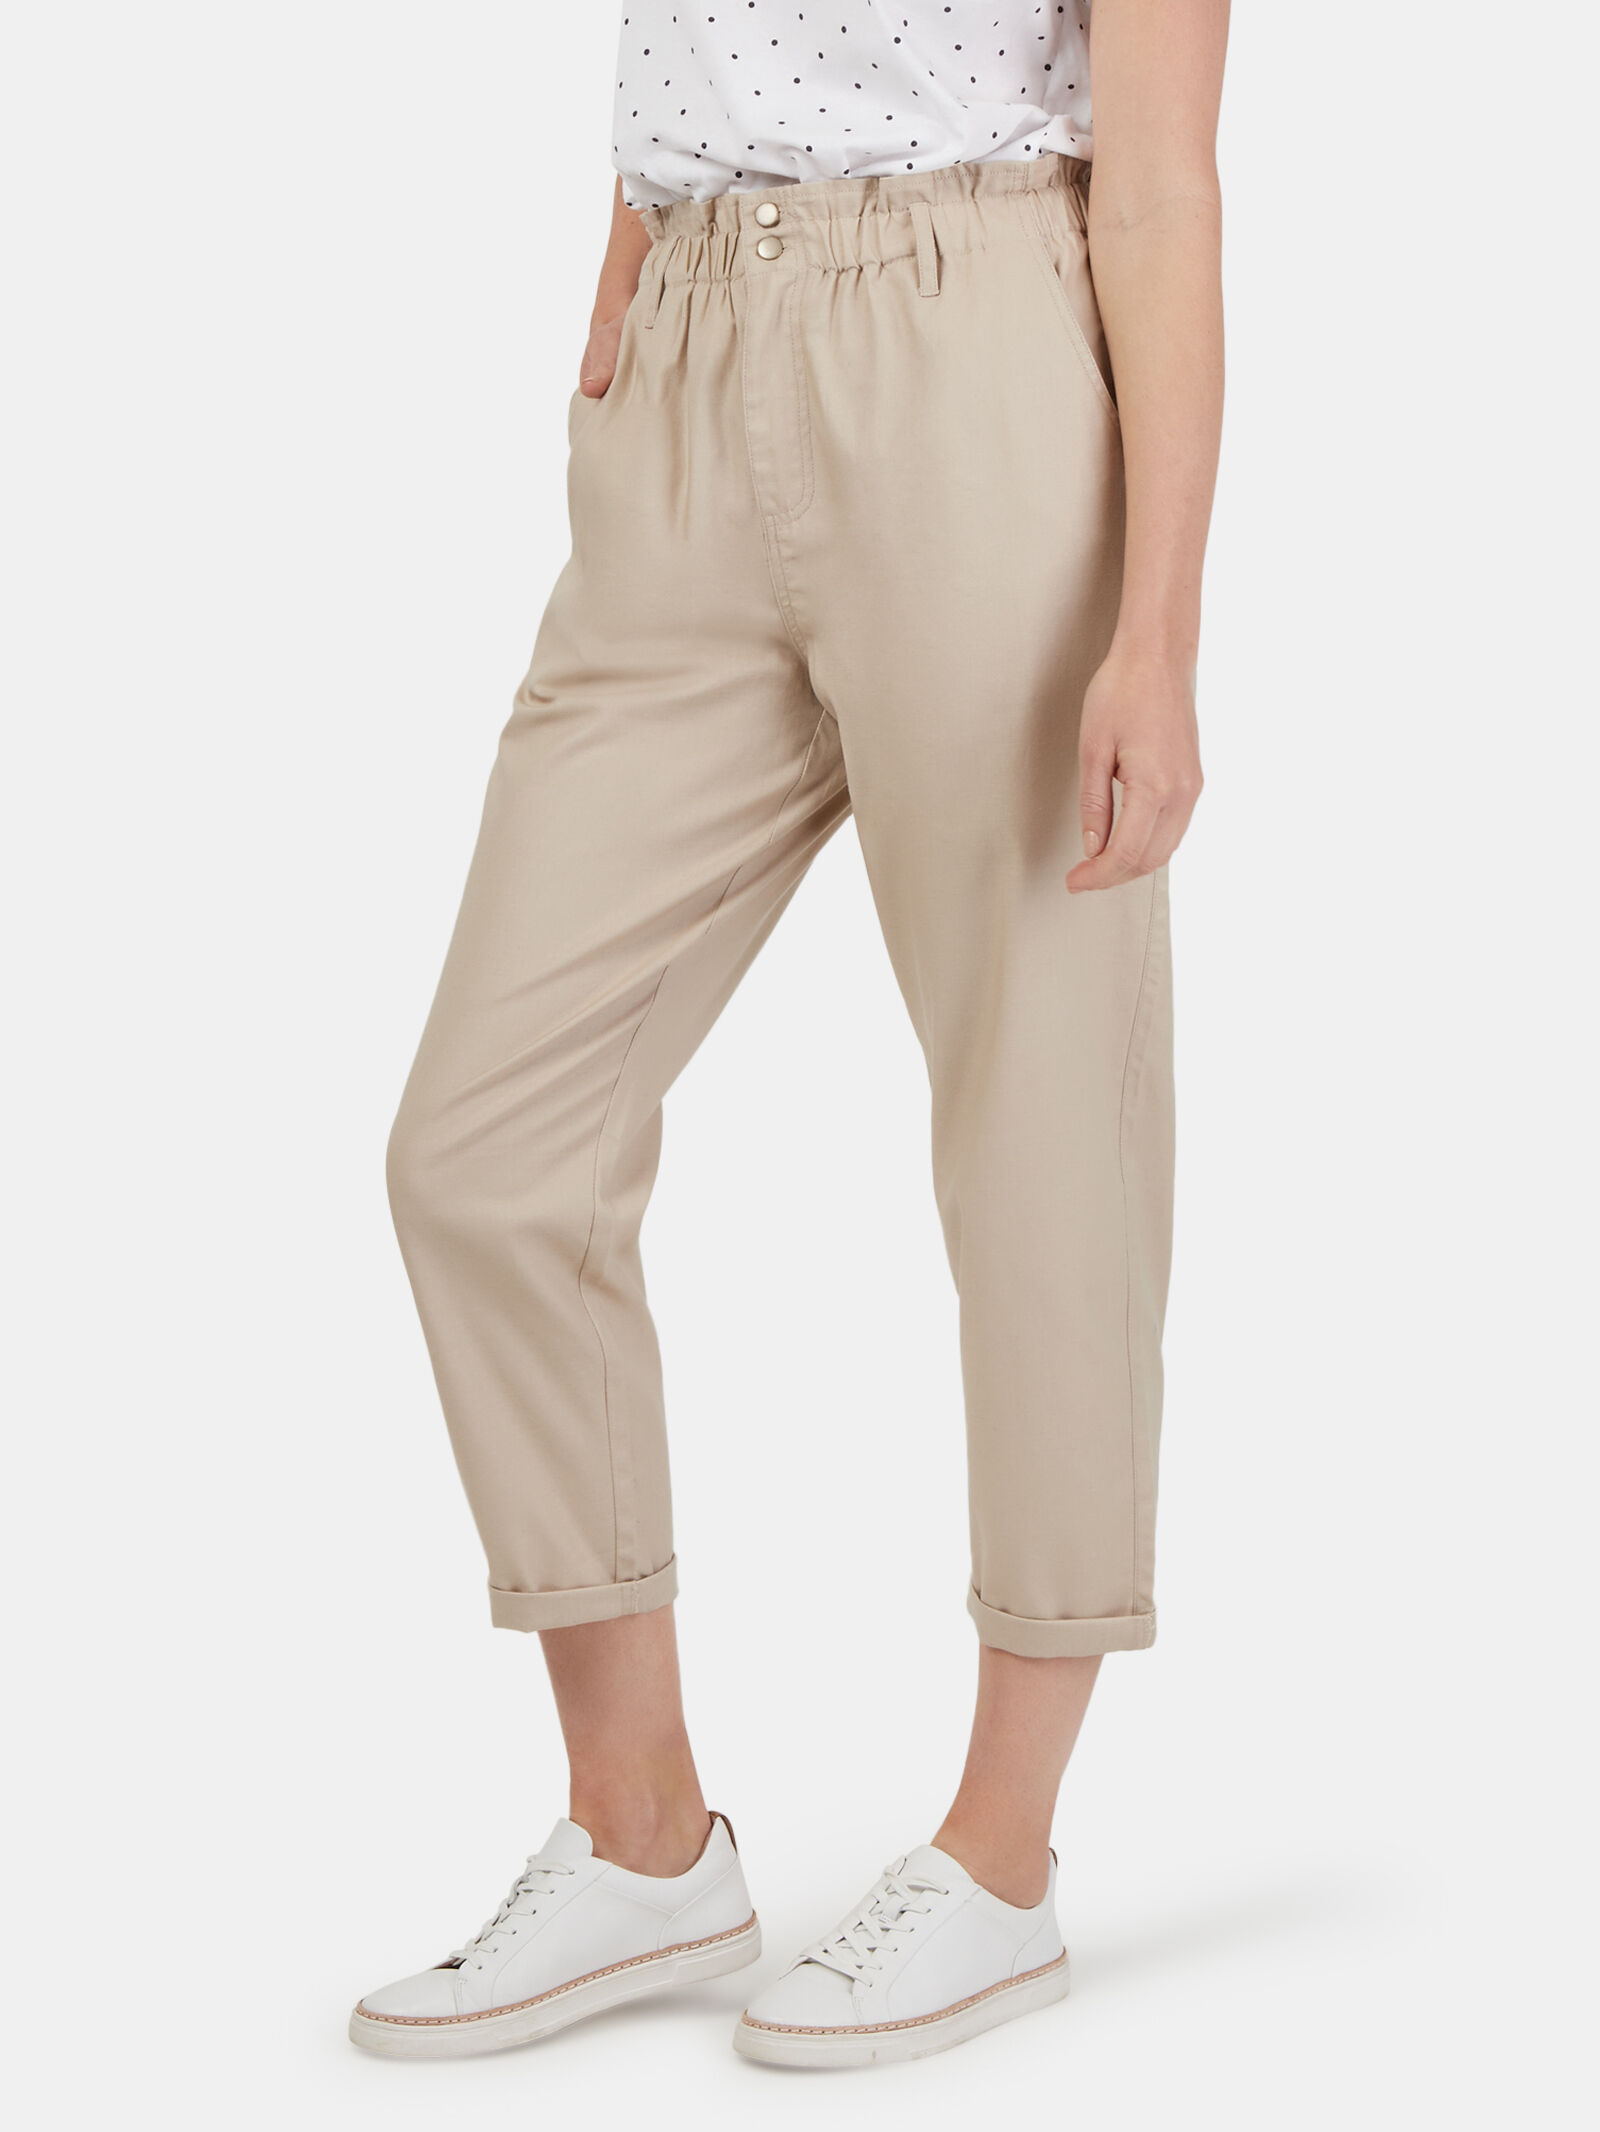 Get Frilled High Waist Tie Solid Cotton Trousers at  699  LBB Shop